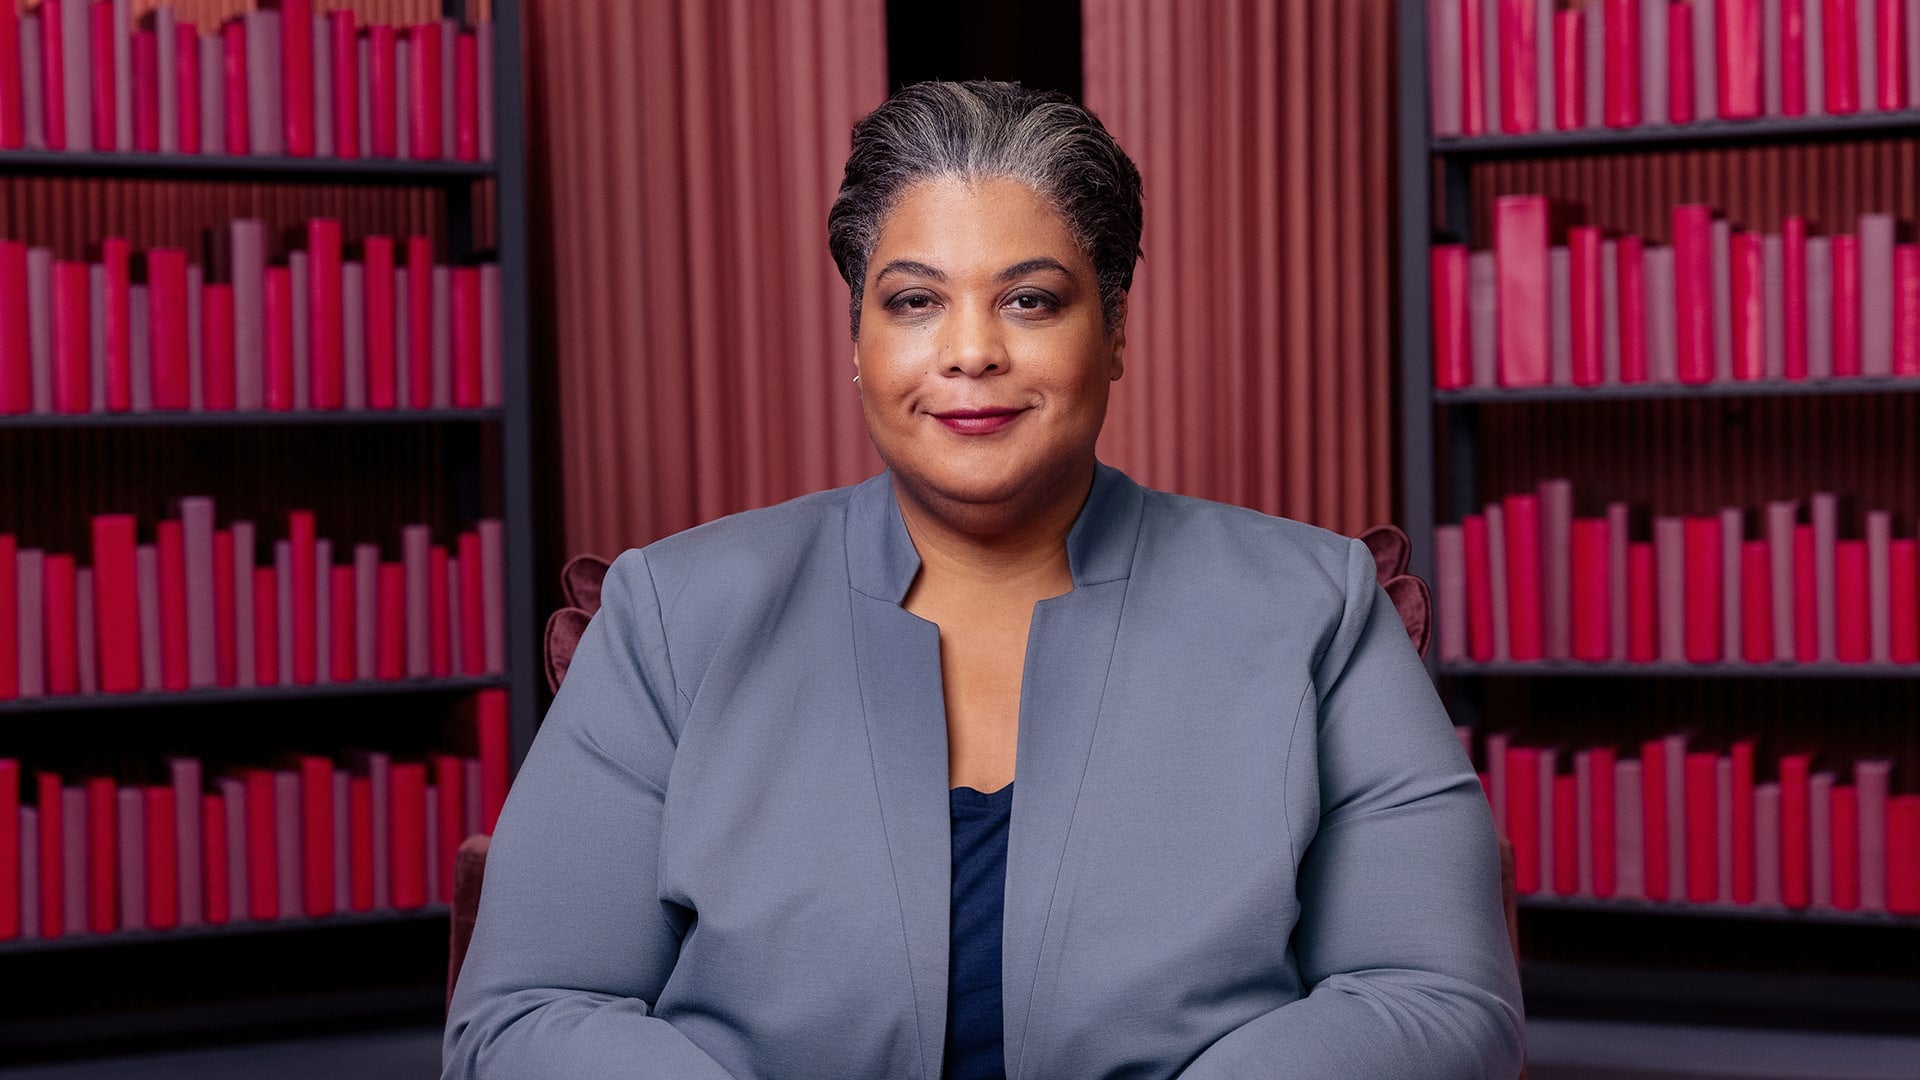 Roxane Gay To Teach MasterClass On Writing For Social Change